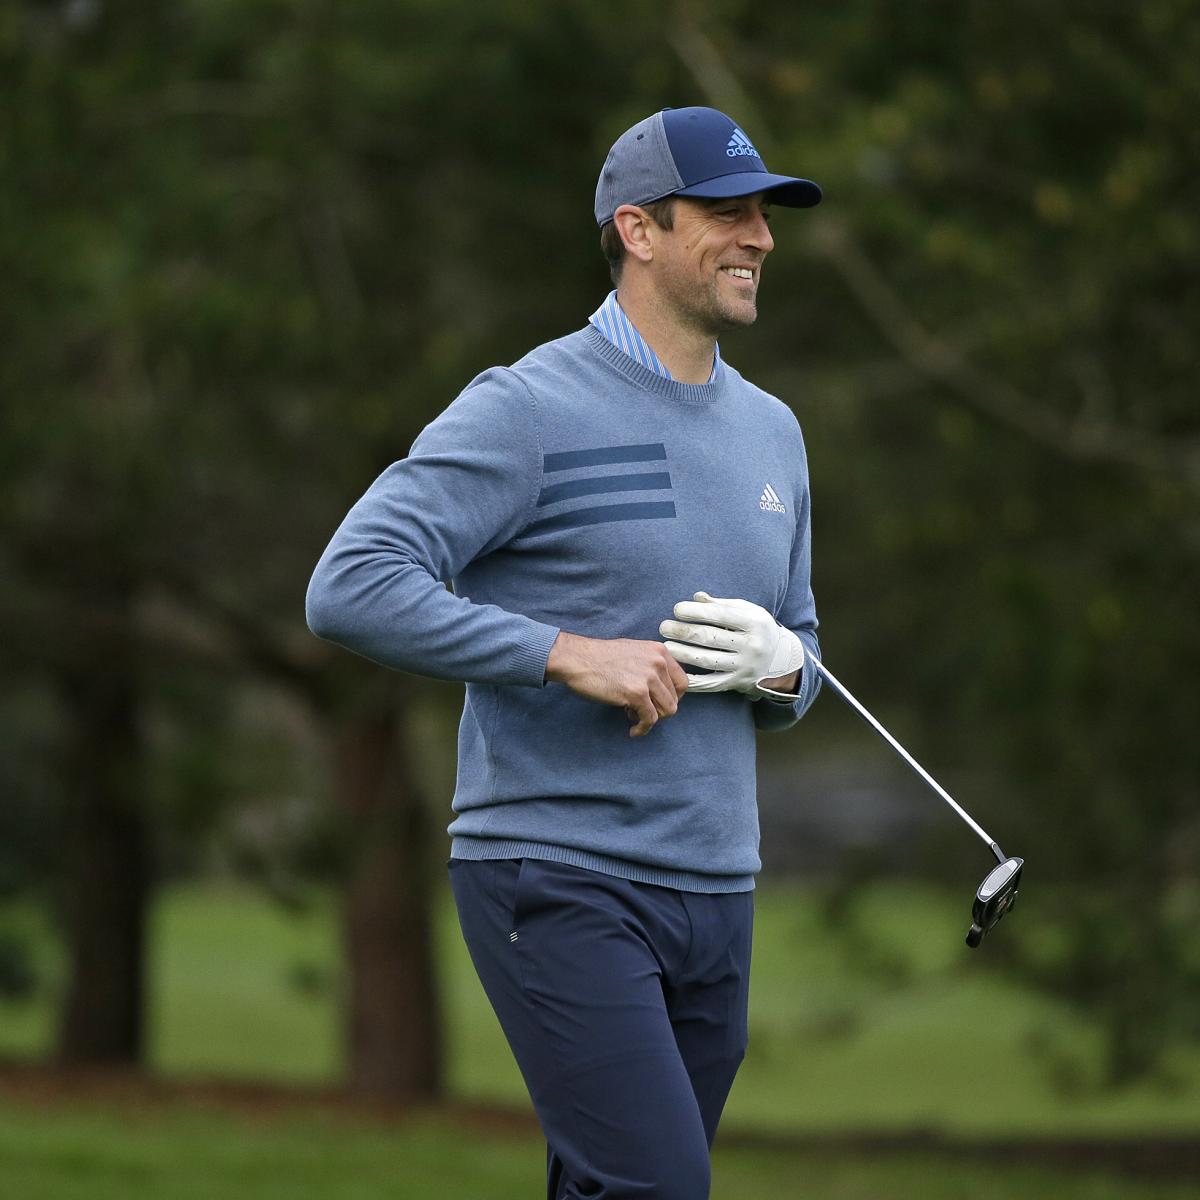 The Best Known Golfers Among NFL Players